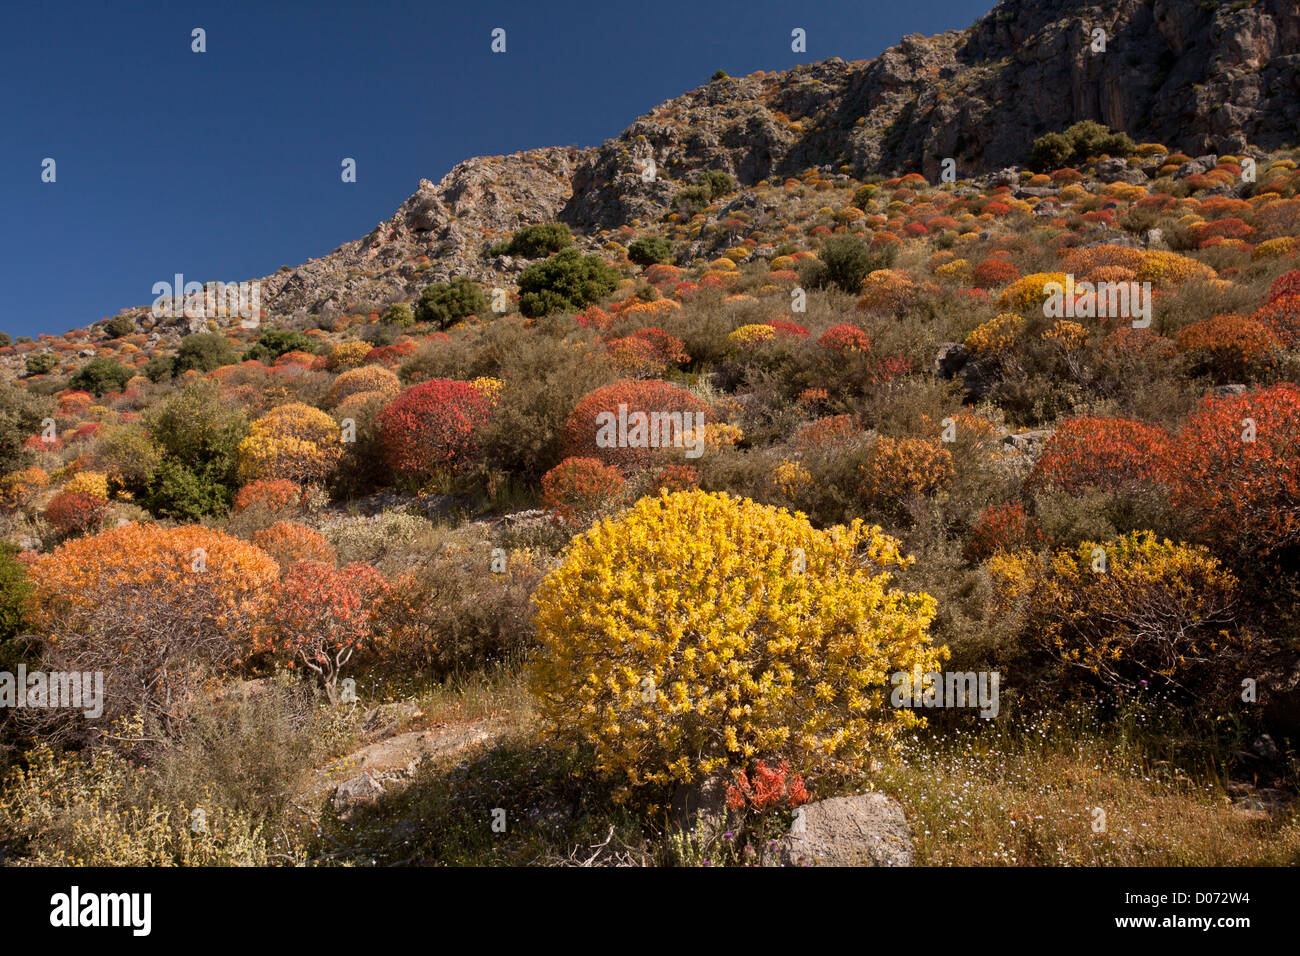 South-facing hillside covered with tree spurge, Euphorbia dendroides, beginning to show 'autumn' colour. Gulf of Itea, Greece. Stock Photo